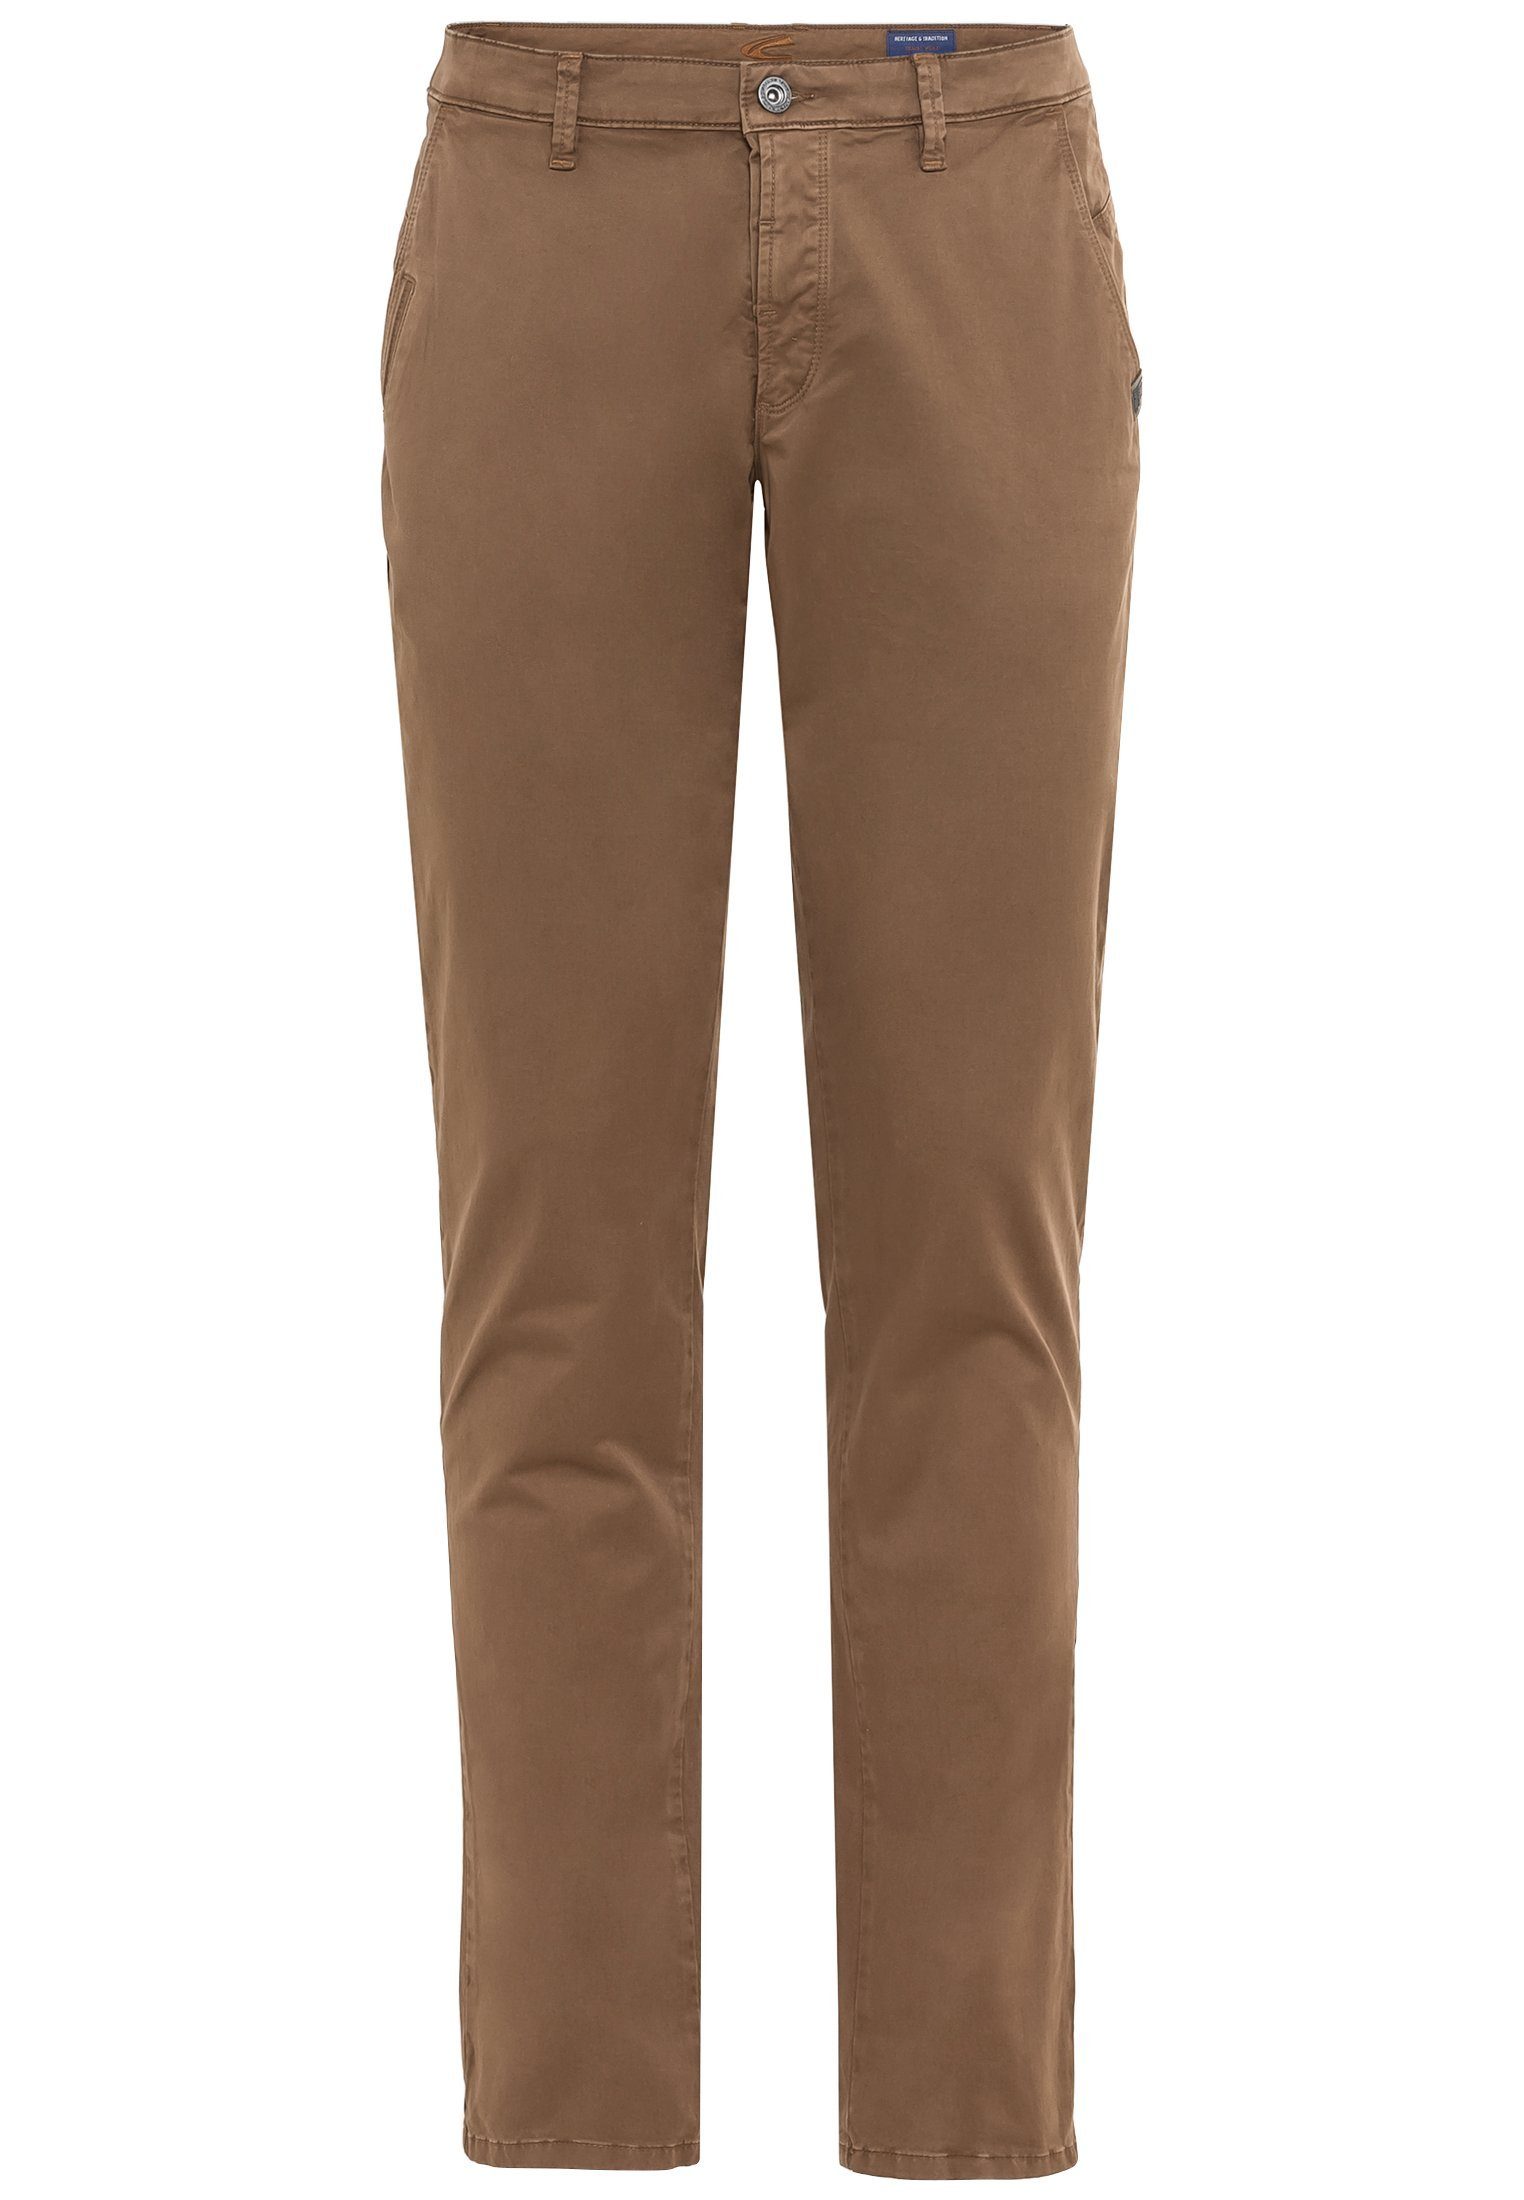 Chinohose Chinohose Garment Dyed Madison camel active Herren active camel